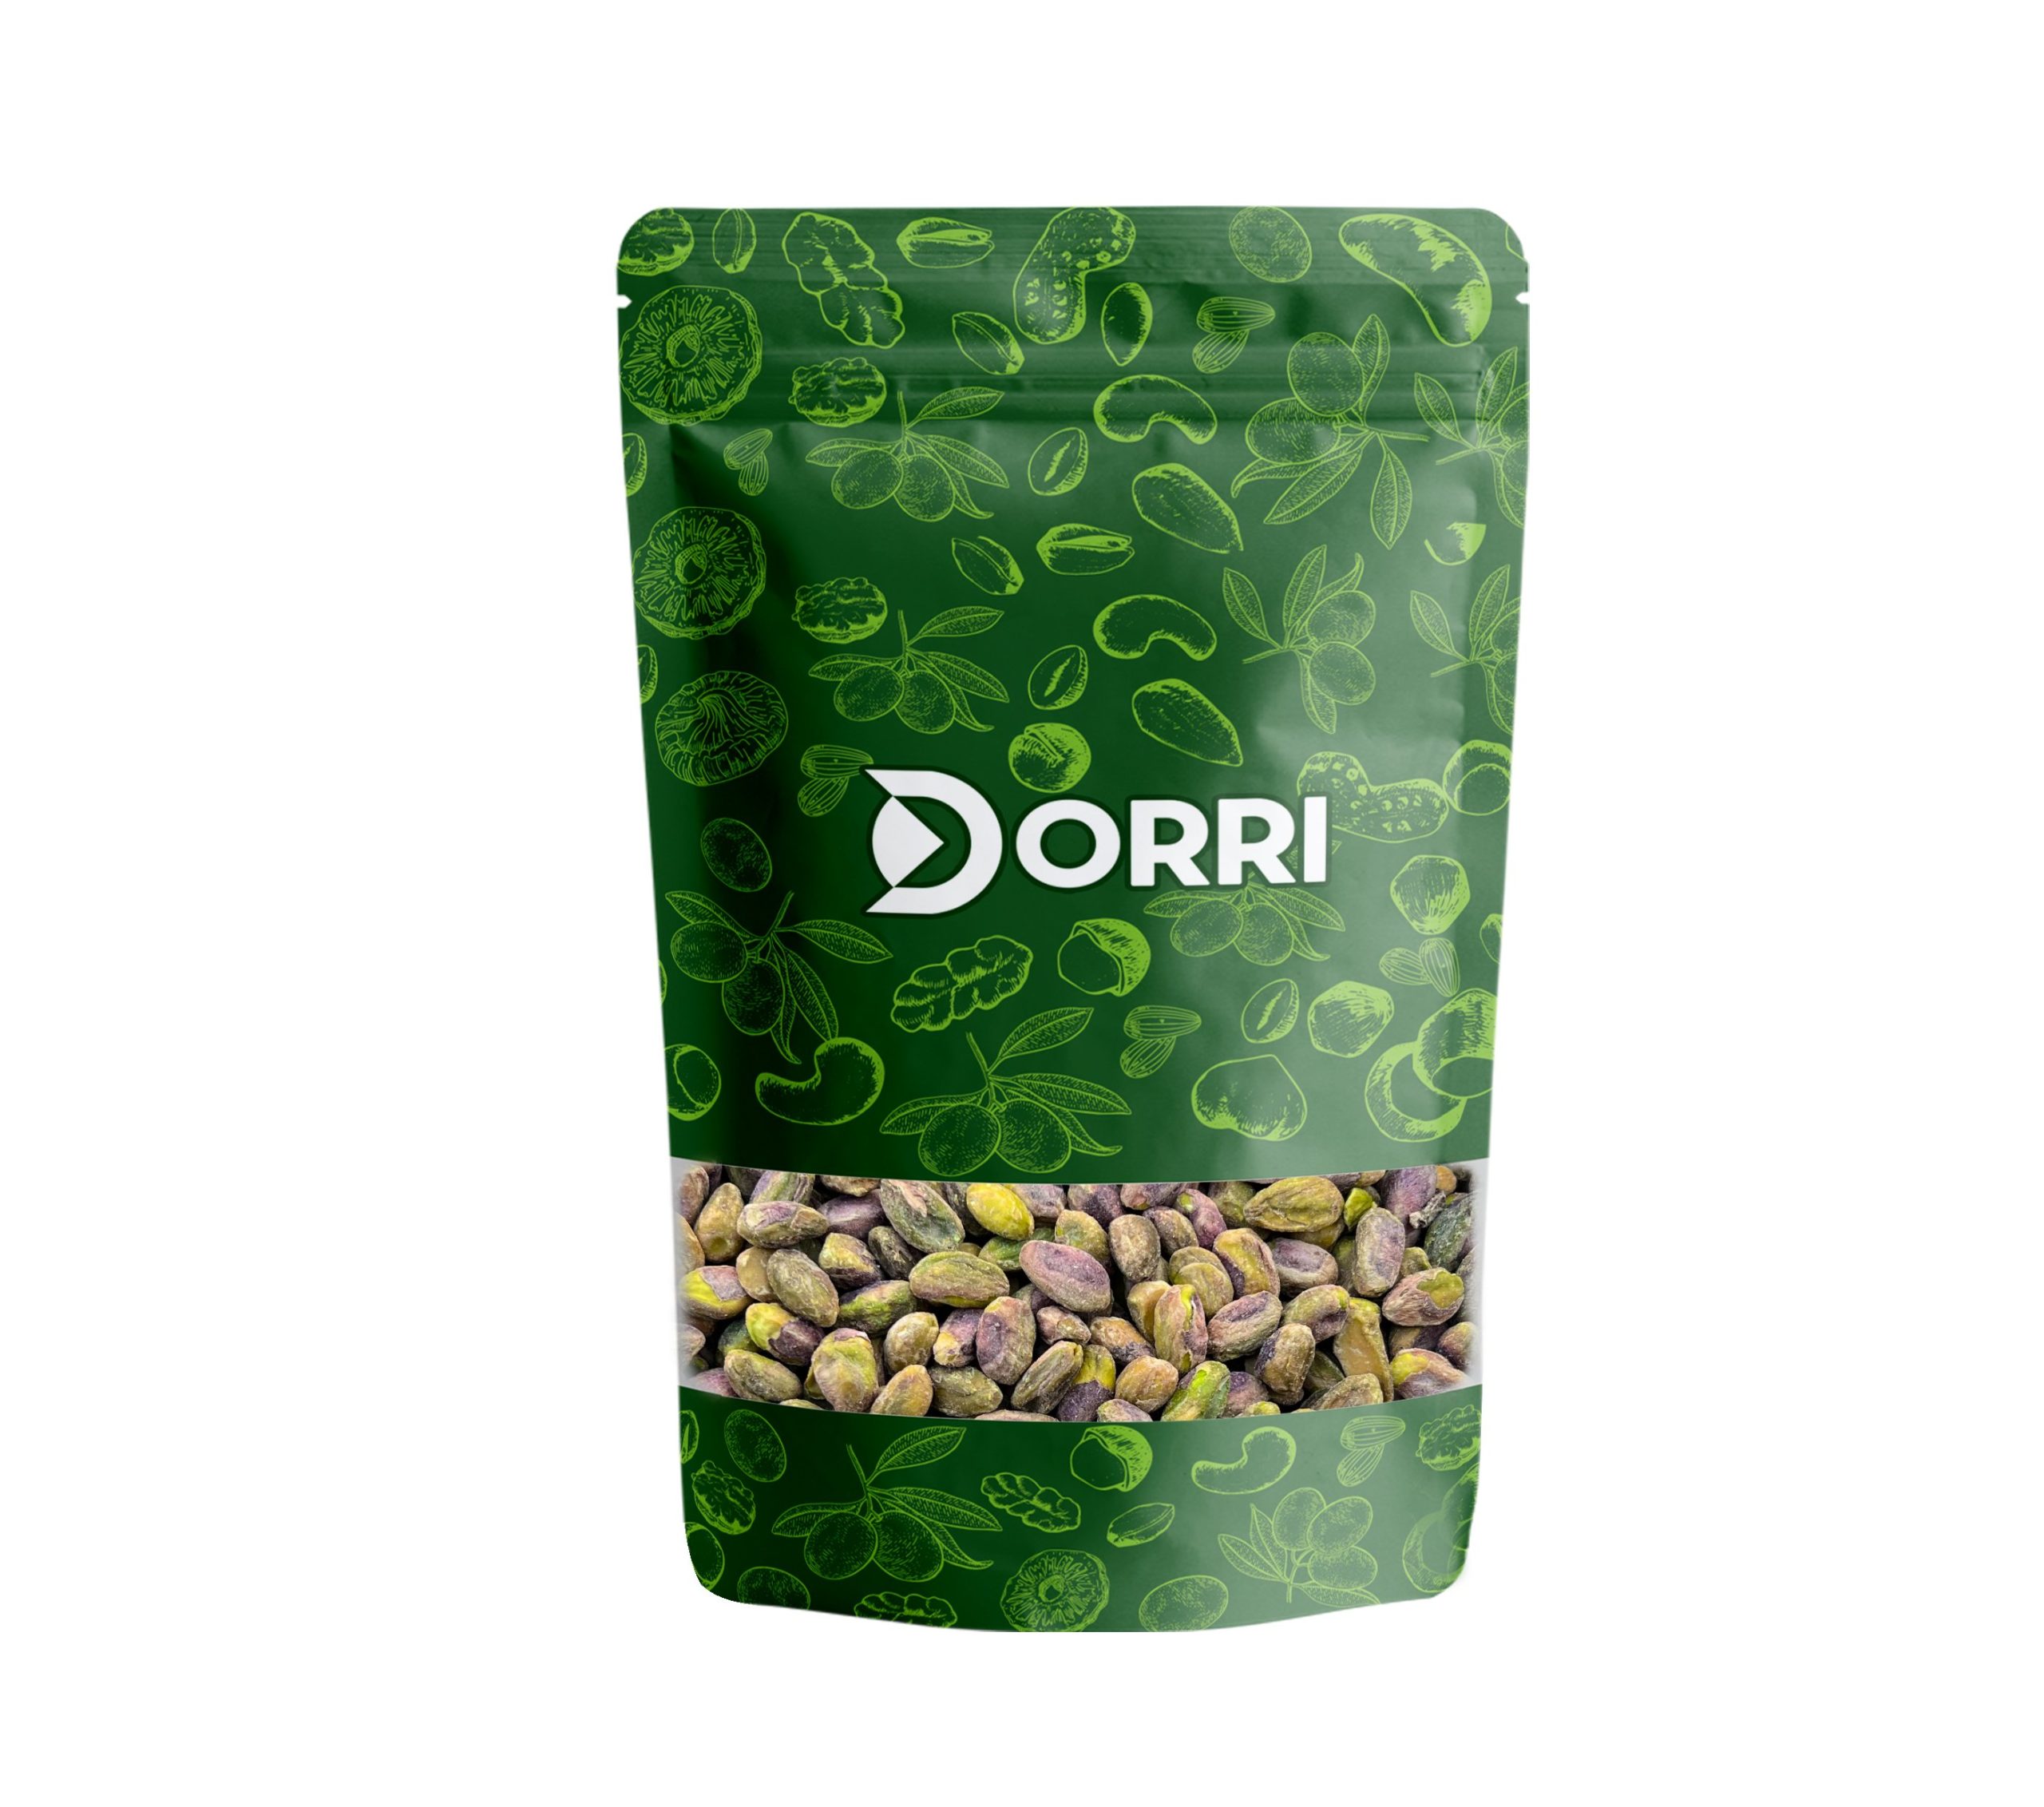 Dorri - Roasted and Salted Pistachios (No shell)